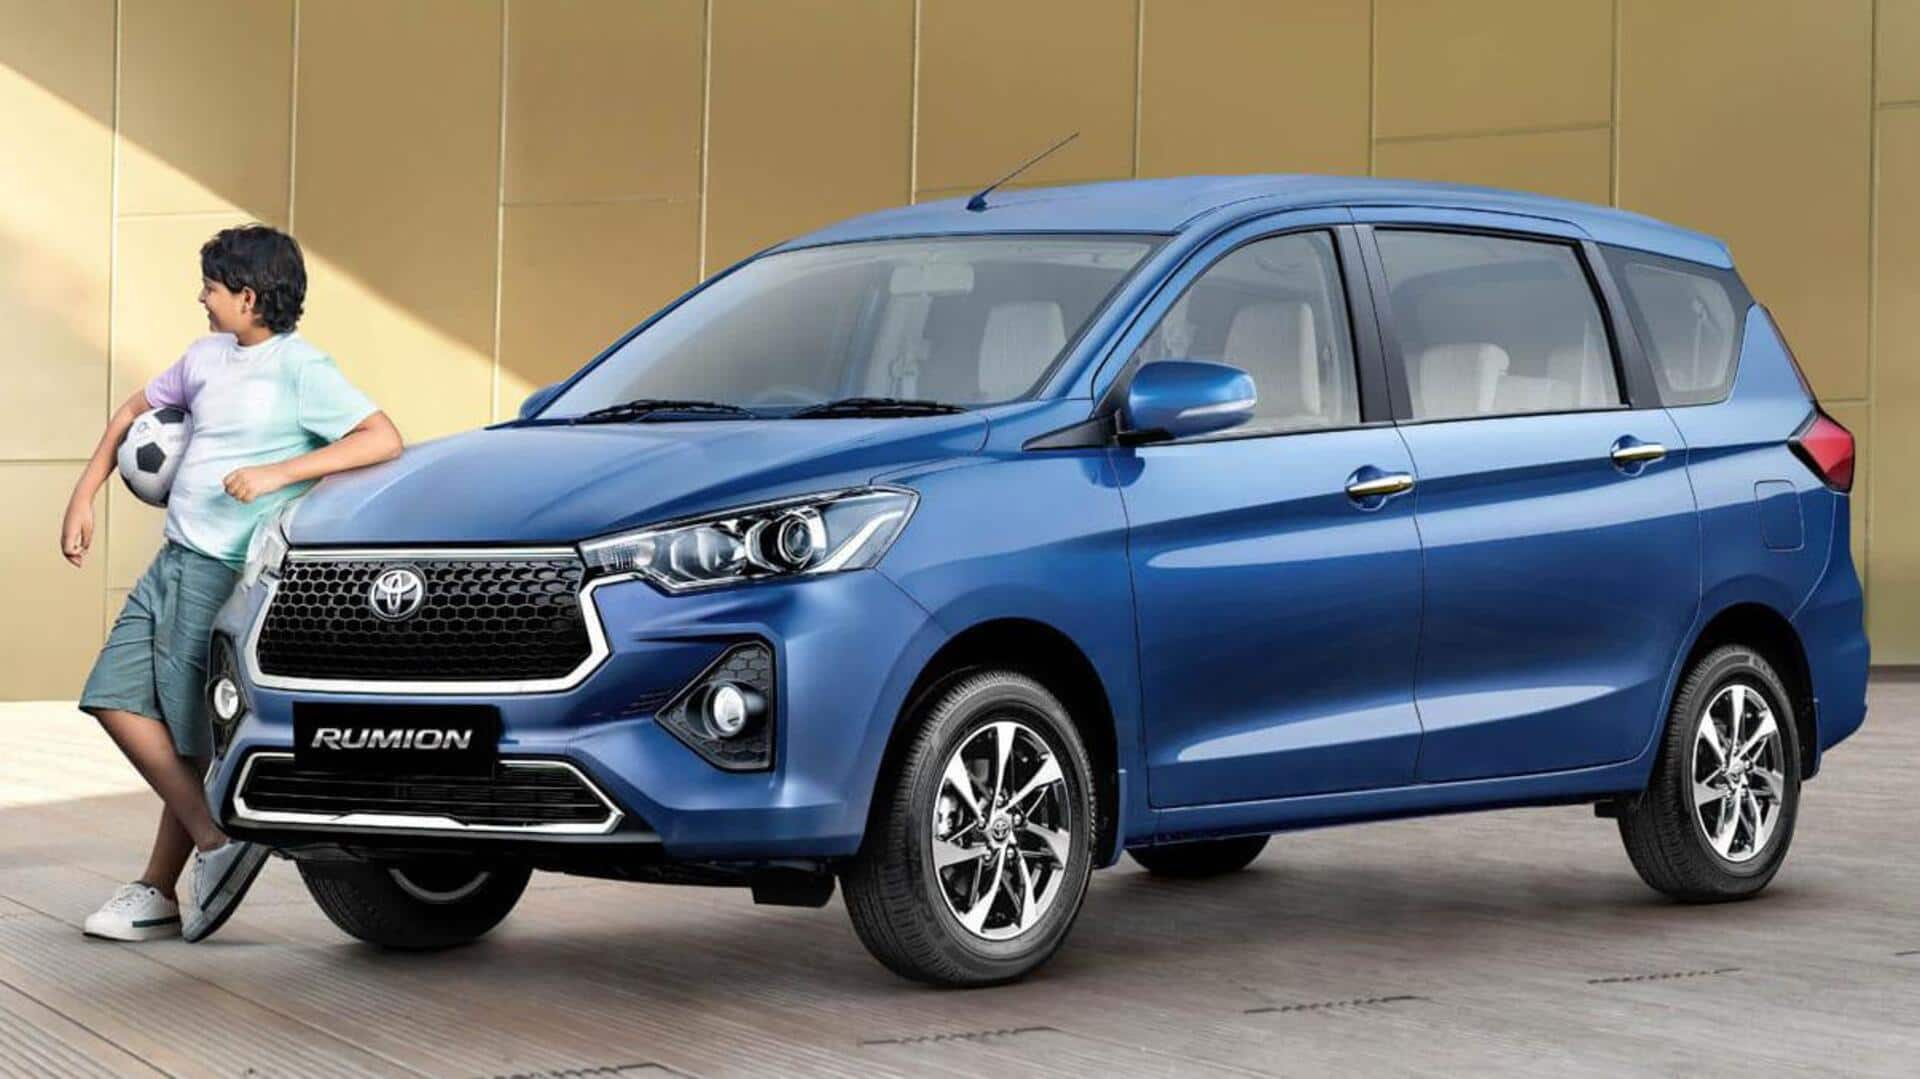 Toyota launches Rumion MPV in India at Rs. 10.29L